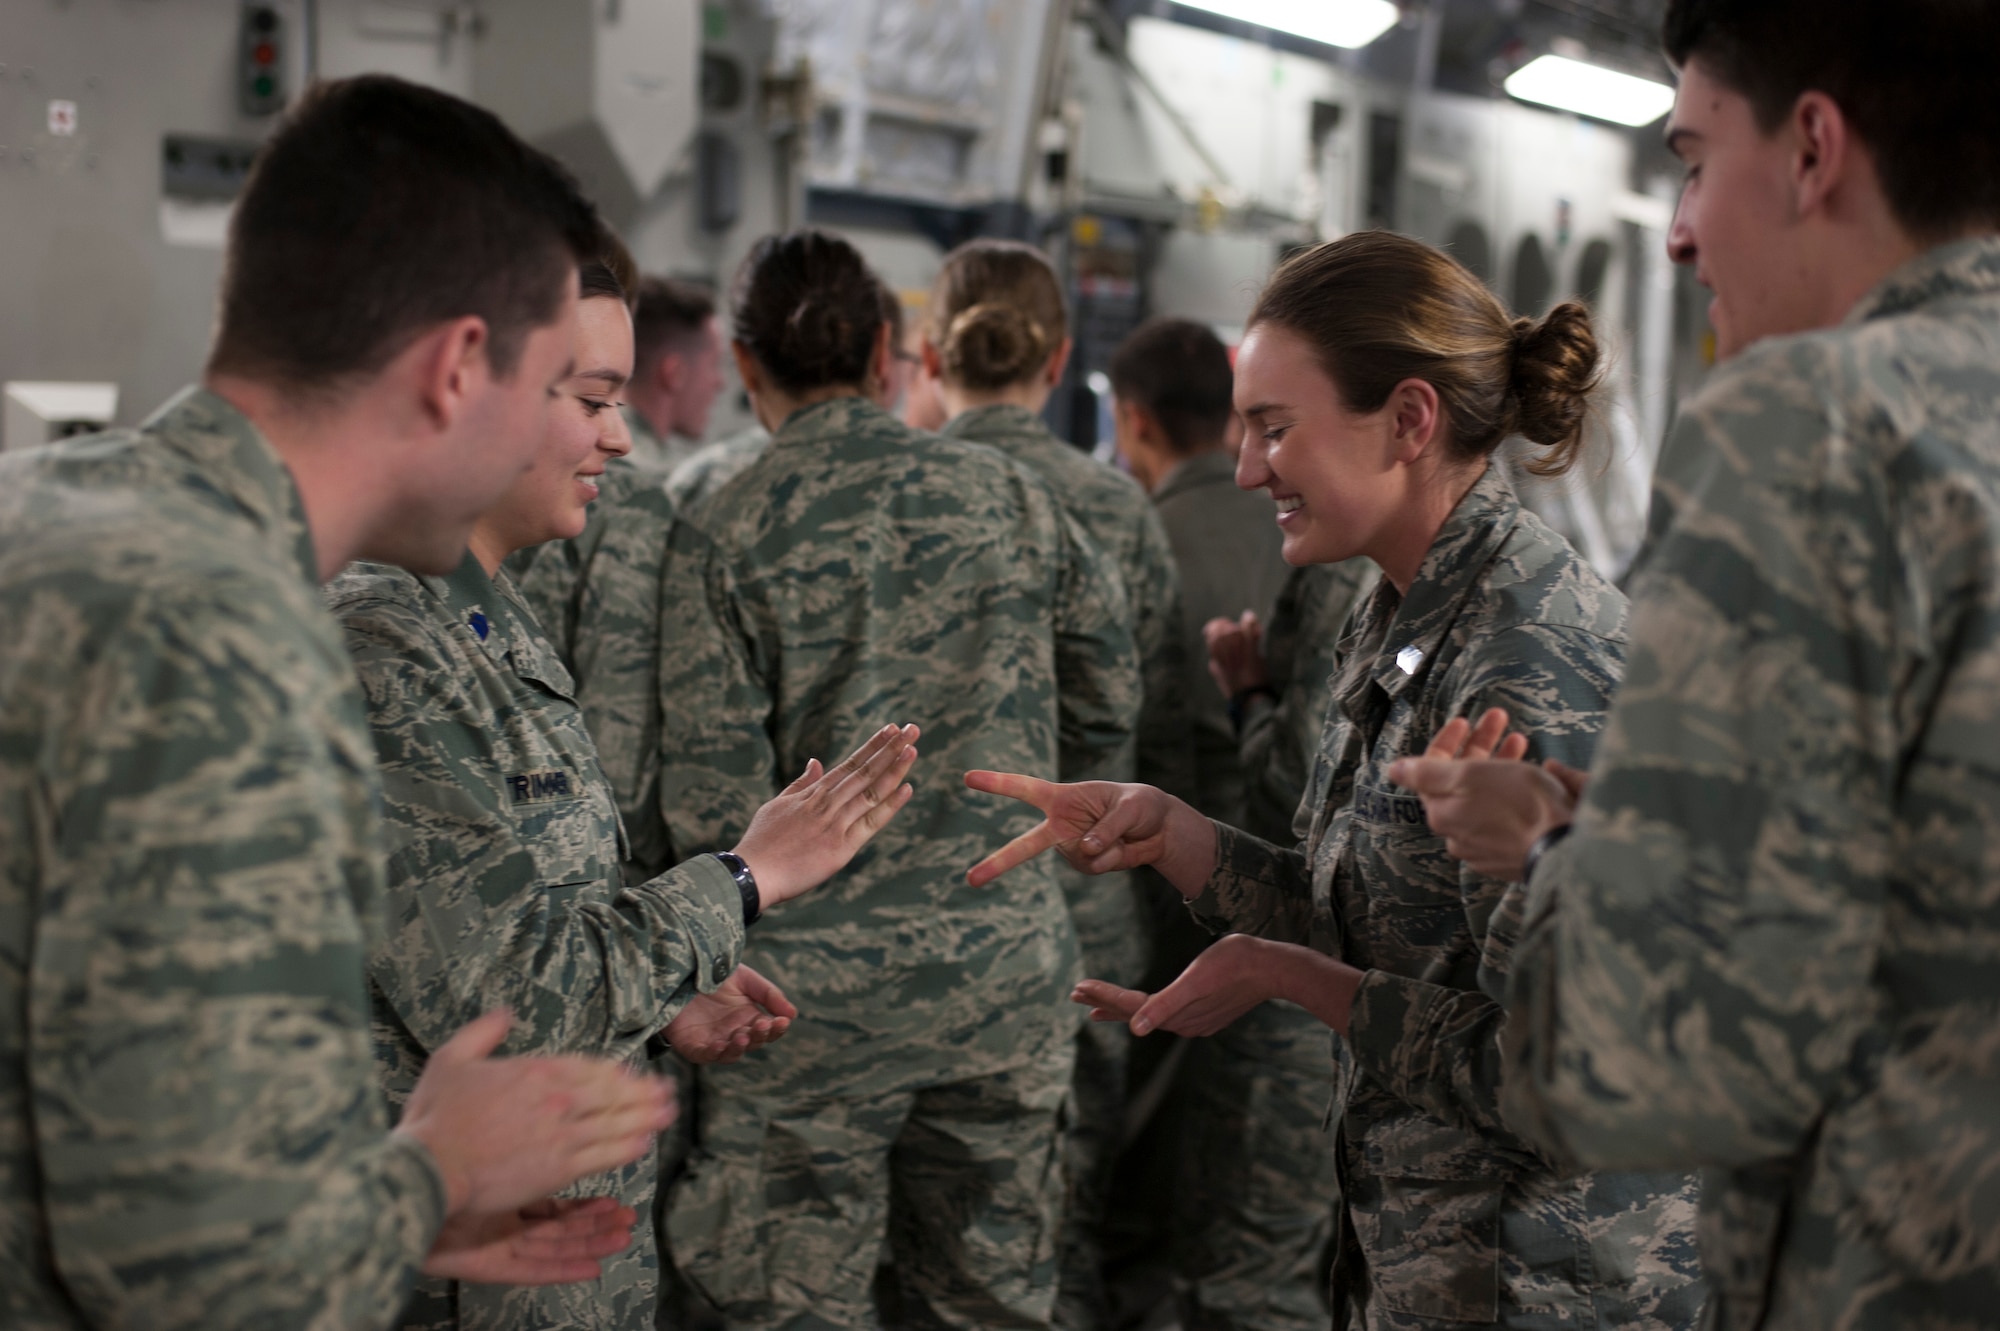 U.S. Air Force Reserve Officers Training Corps cadets assigned to Detachment 640 from Miami University, Ohio, conduct a leadership exercise during an in-flight leadership course aboard a C-17 Globemaster III aircraft from the 445th Airlift Wing at Wright-Patterson Air Force Base, Ohio, March 19, 2018.